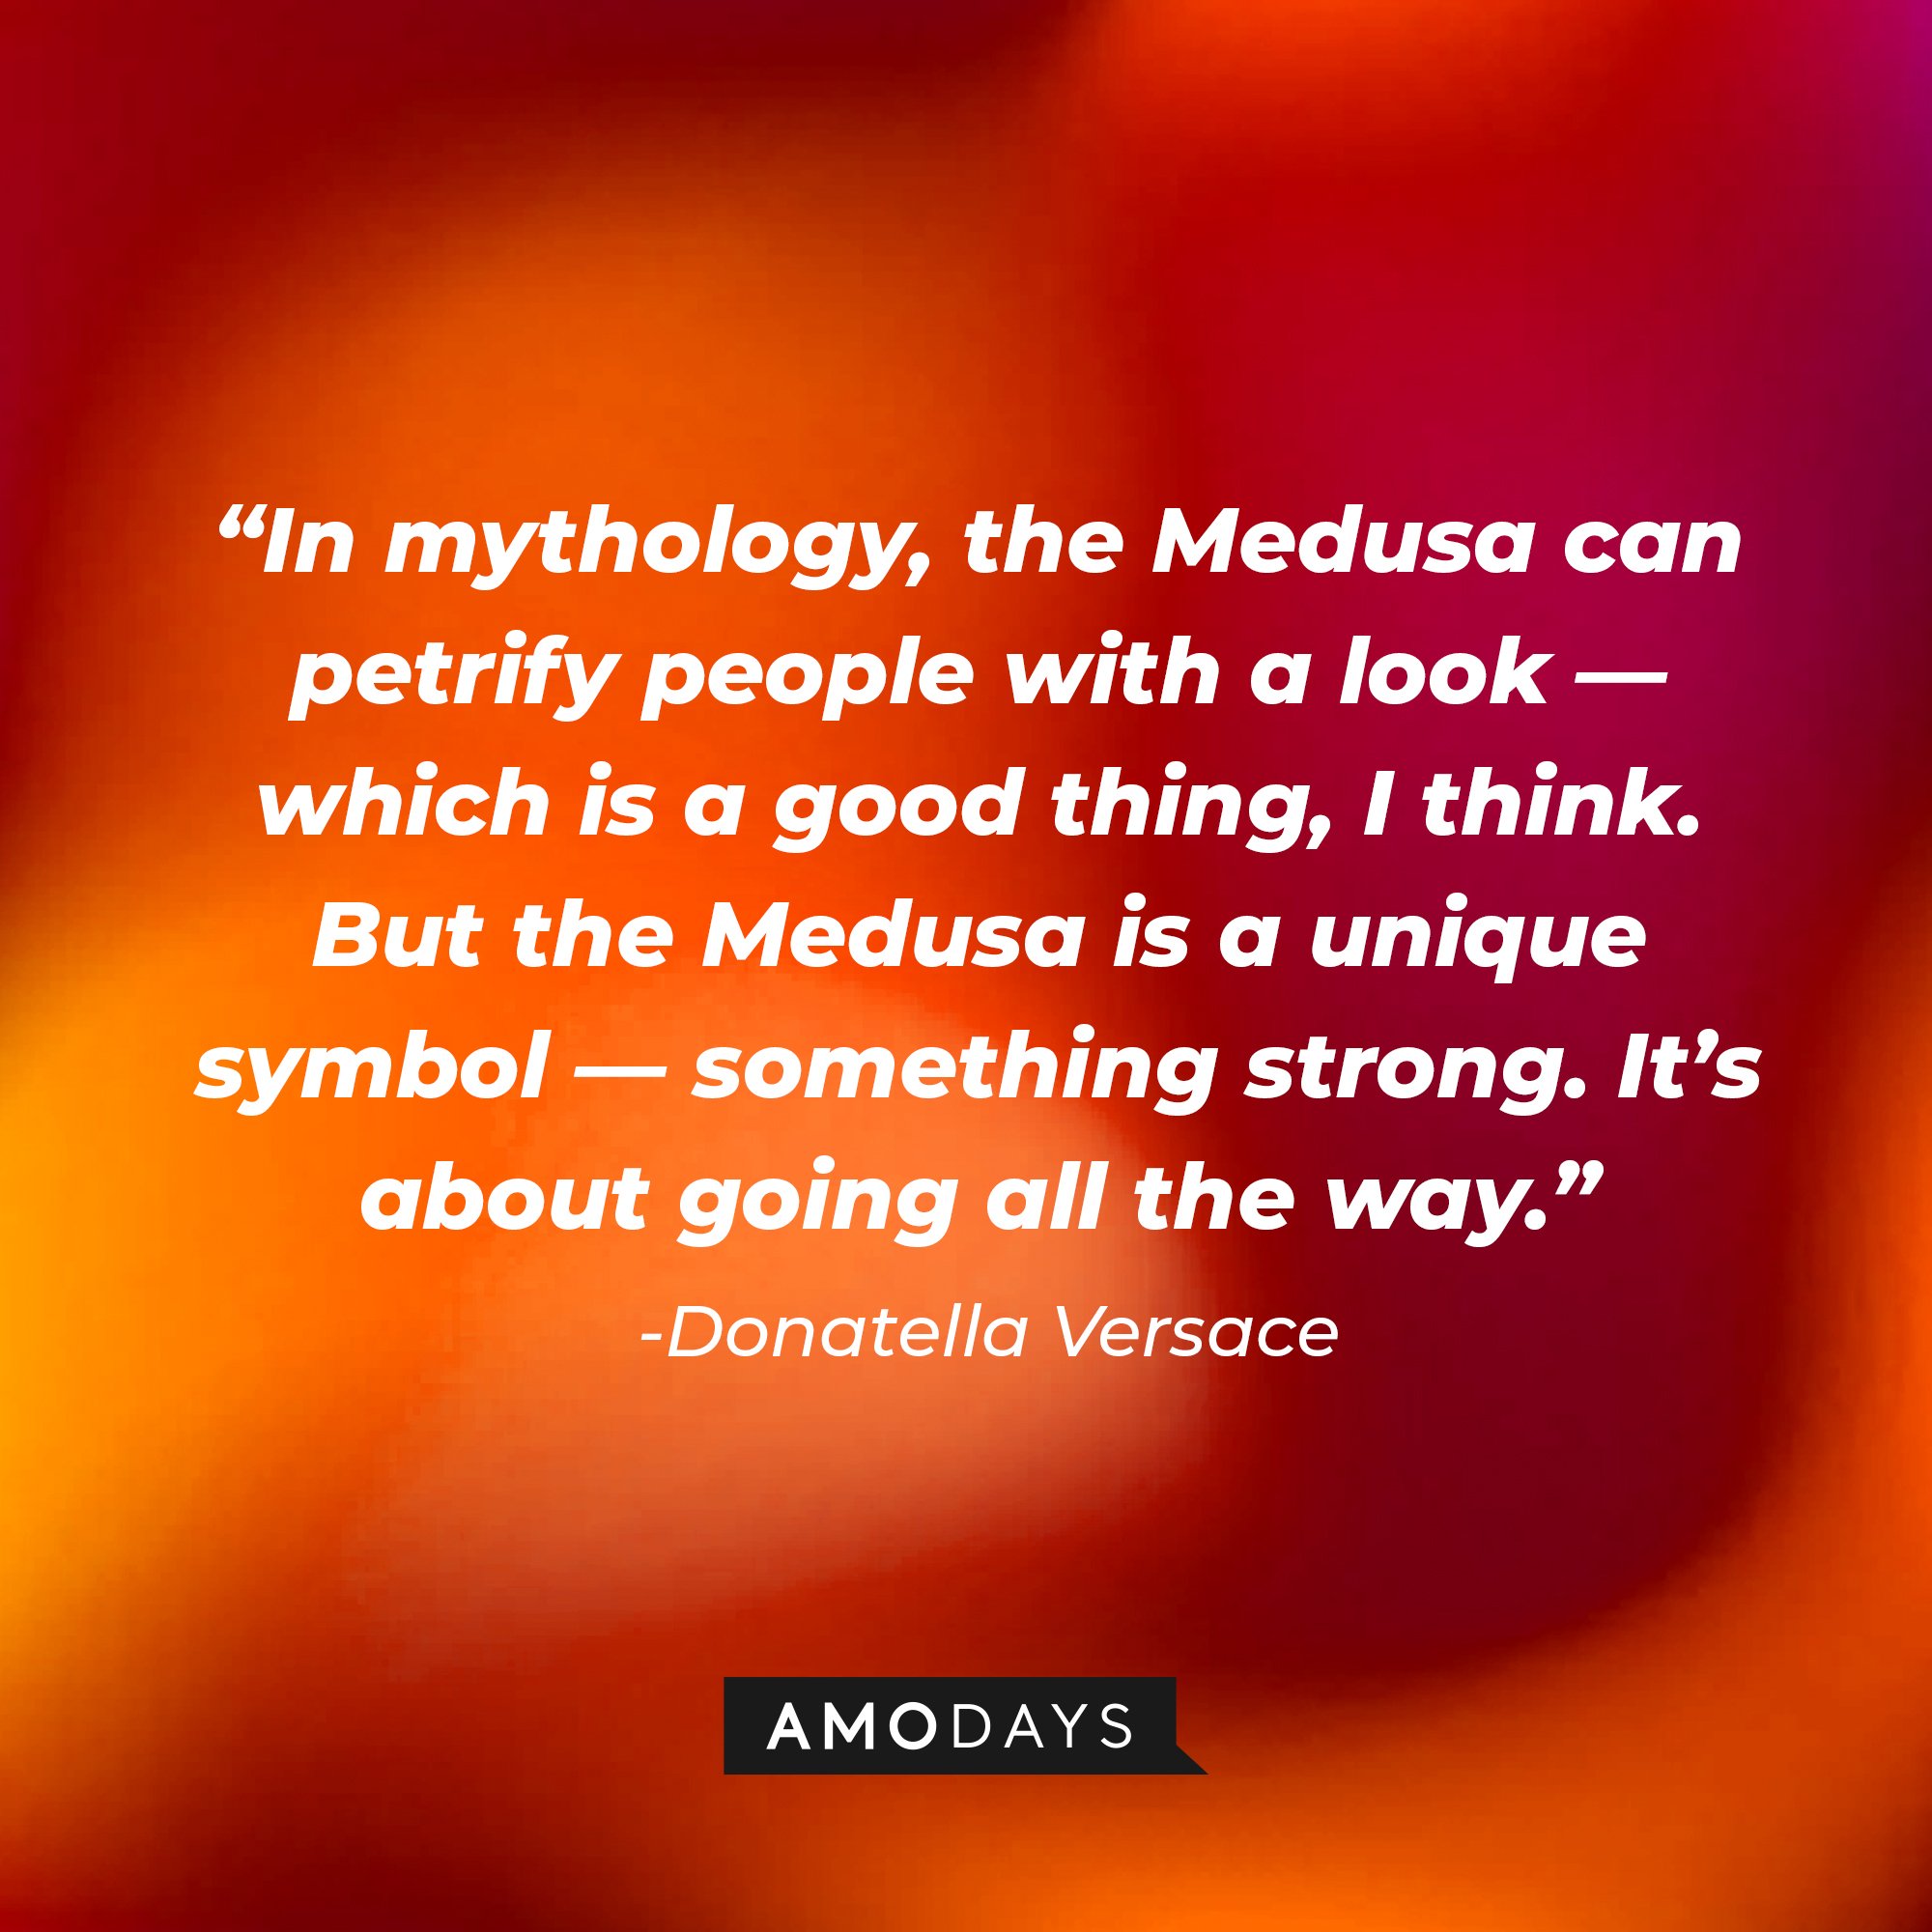  Donatella Versace’s quote: “In mythology, the Medusa can petrify people with a look—which is a good thing, I think. But the Medusa is a unique symbol—something strong. It’s about going all the way.” | Image: AmoDays